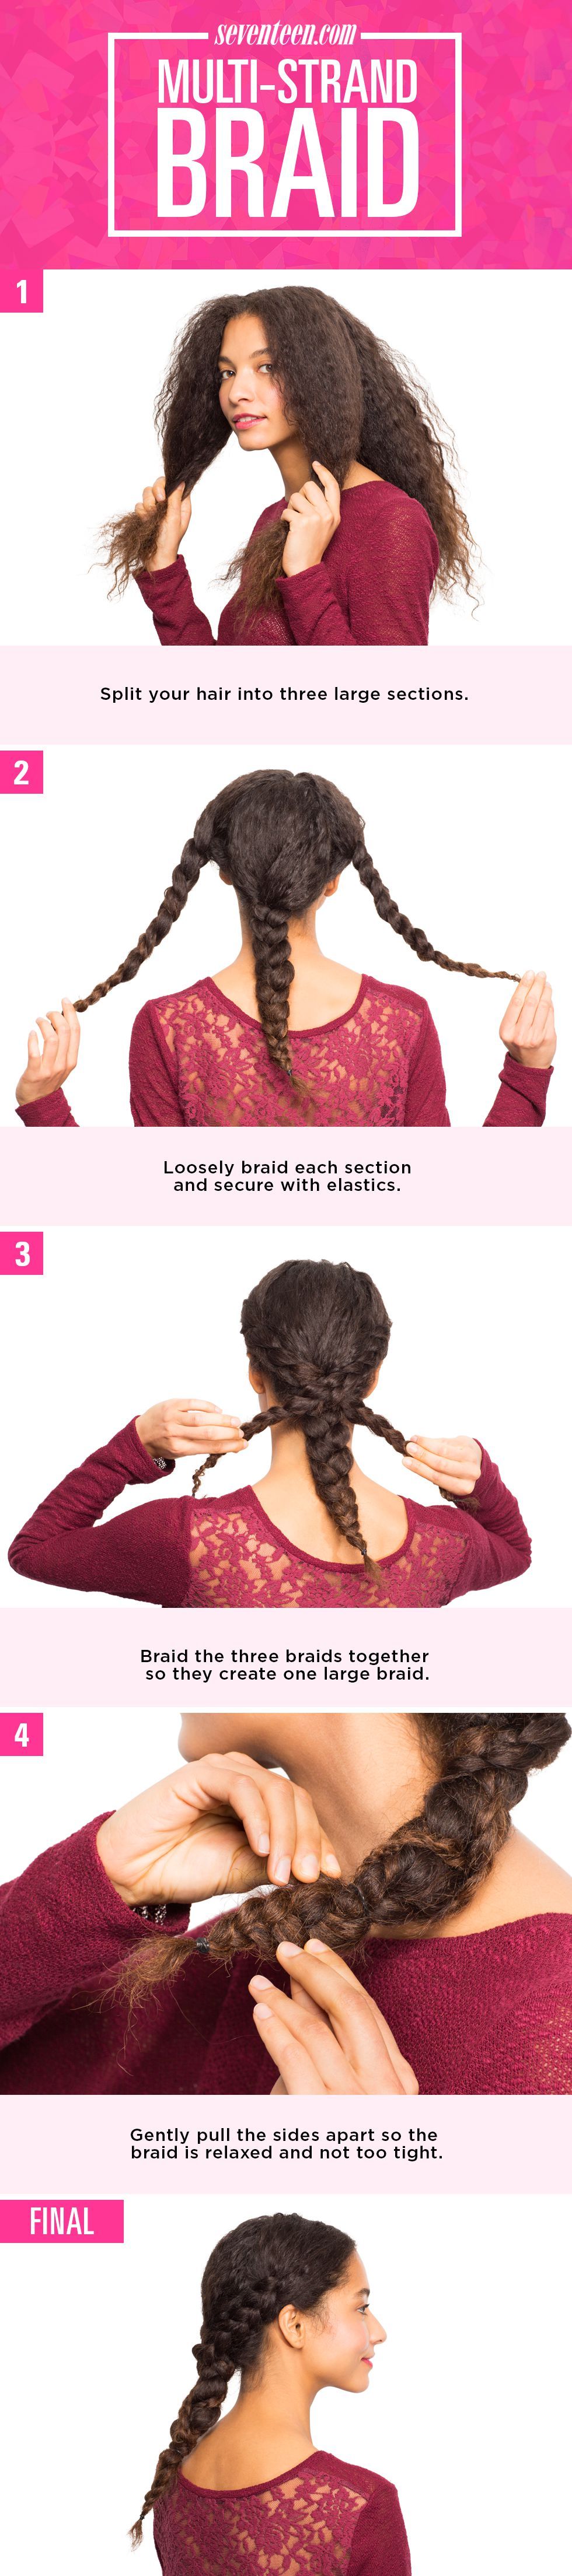 Hairstyle, Shoulder, Textile, Joint, Wrist, Pattern, Style, Magenta, Neck, Black, 